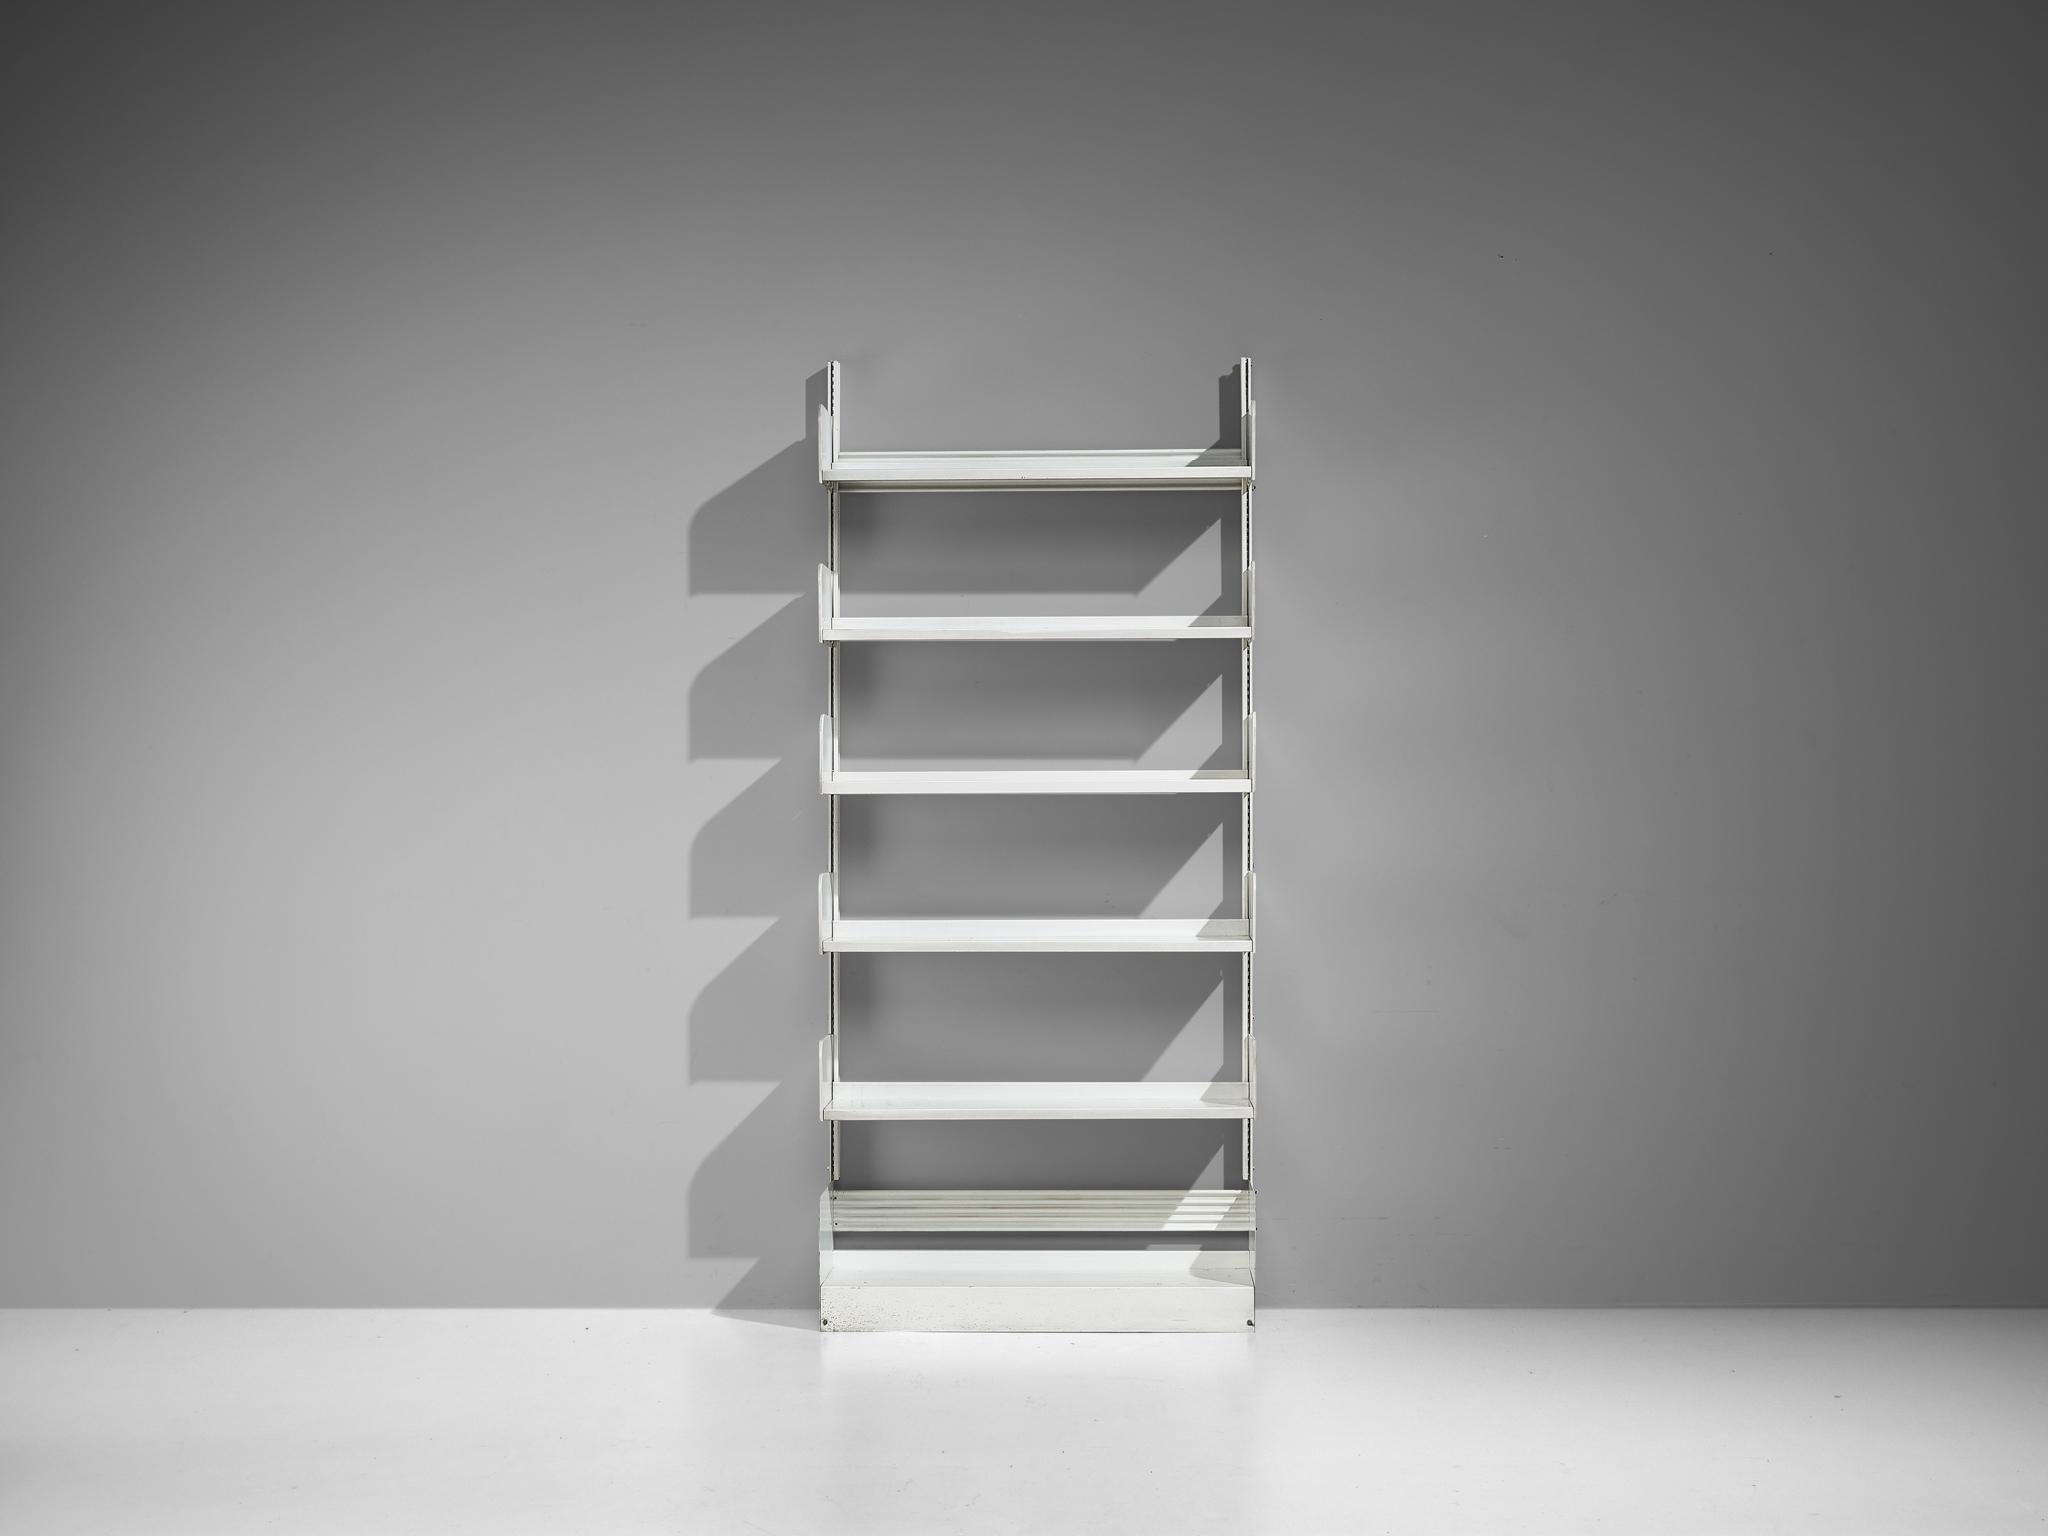 Lips Vago 'Congresso' Bookcase in White Steel In Good Condition For Sale In Waalwijk, NL